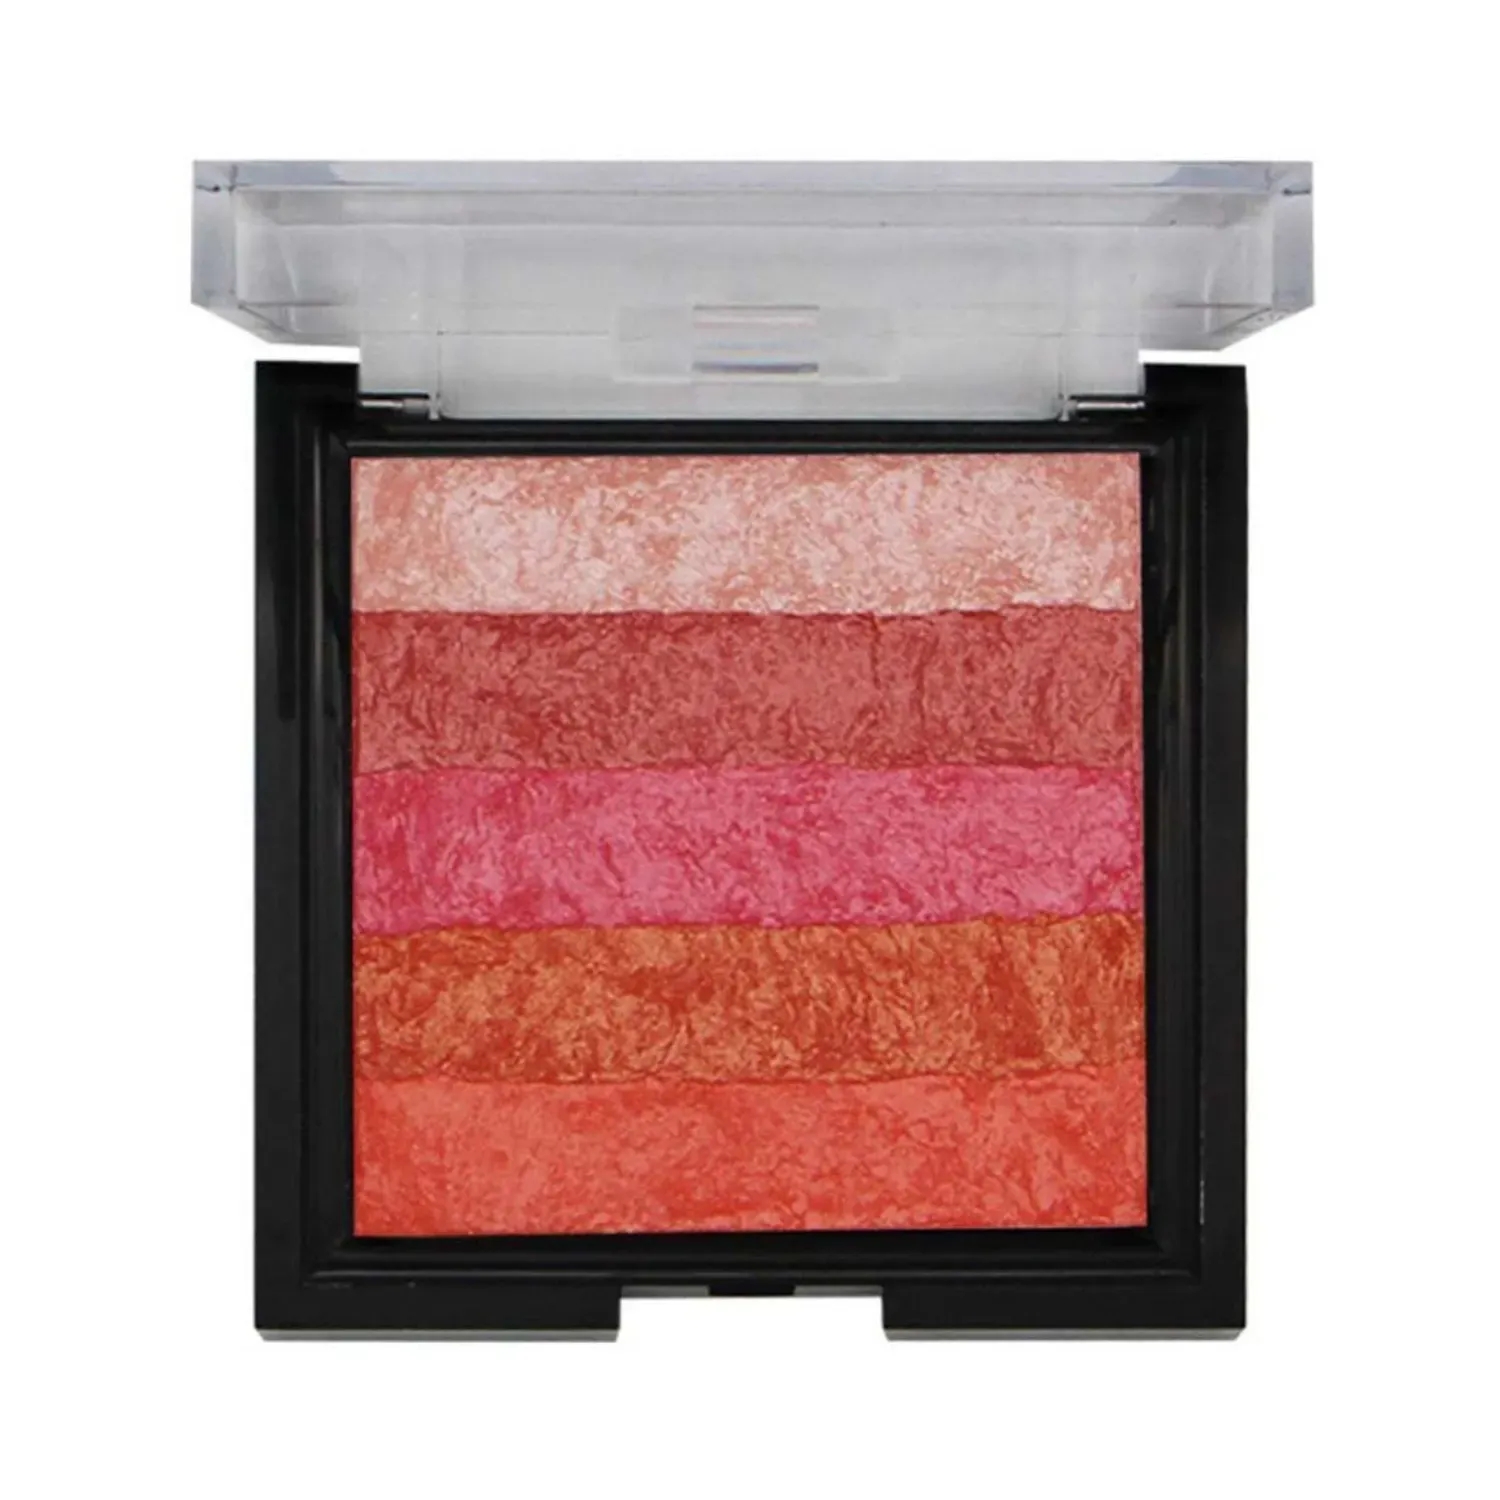 Fashion Colour | Fashion Colour 2-in-1 Shimmer Brick And Blusher - 05 Shade (8g)